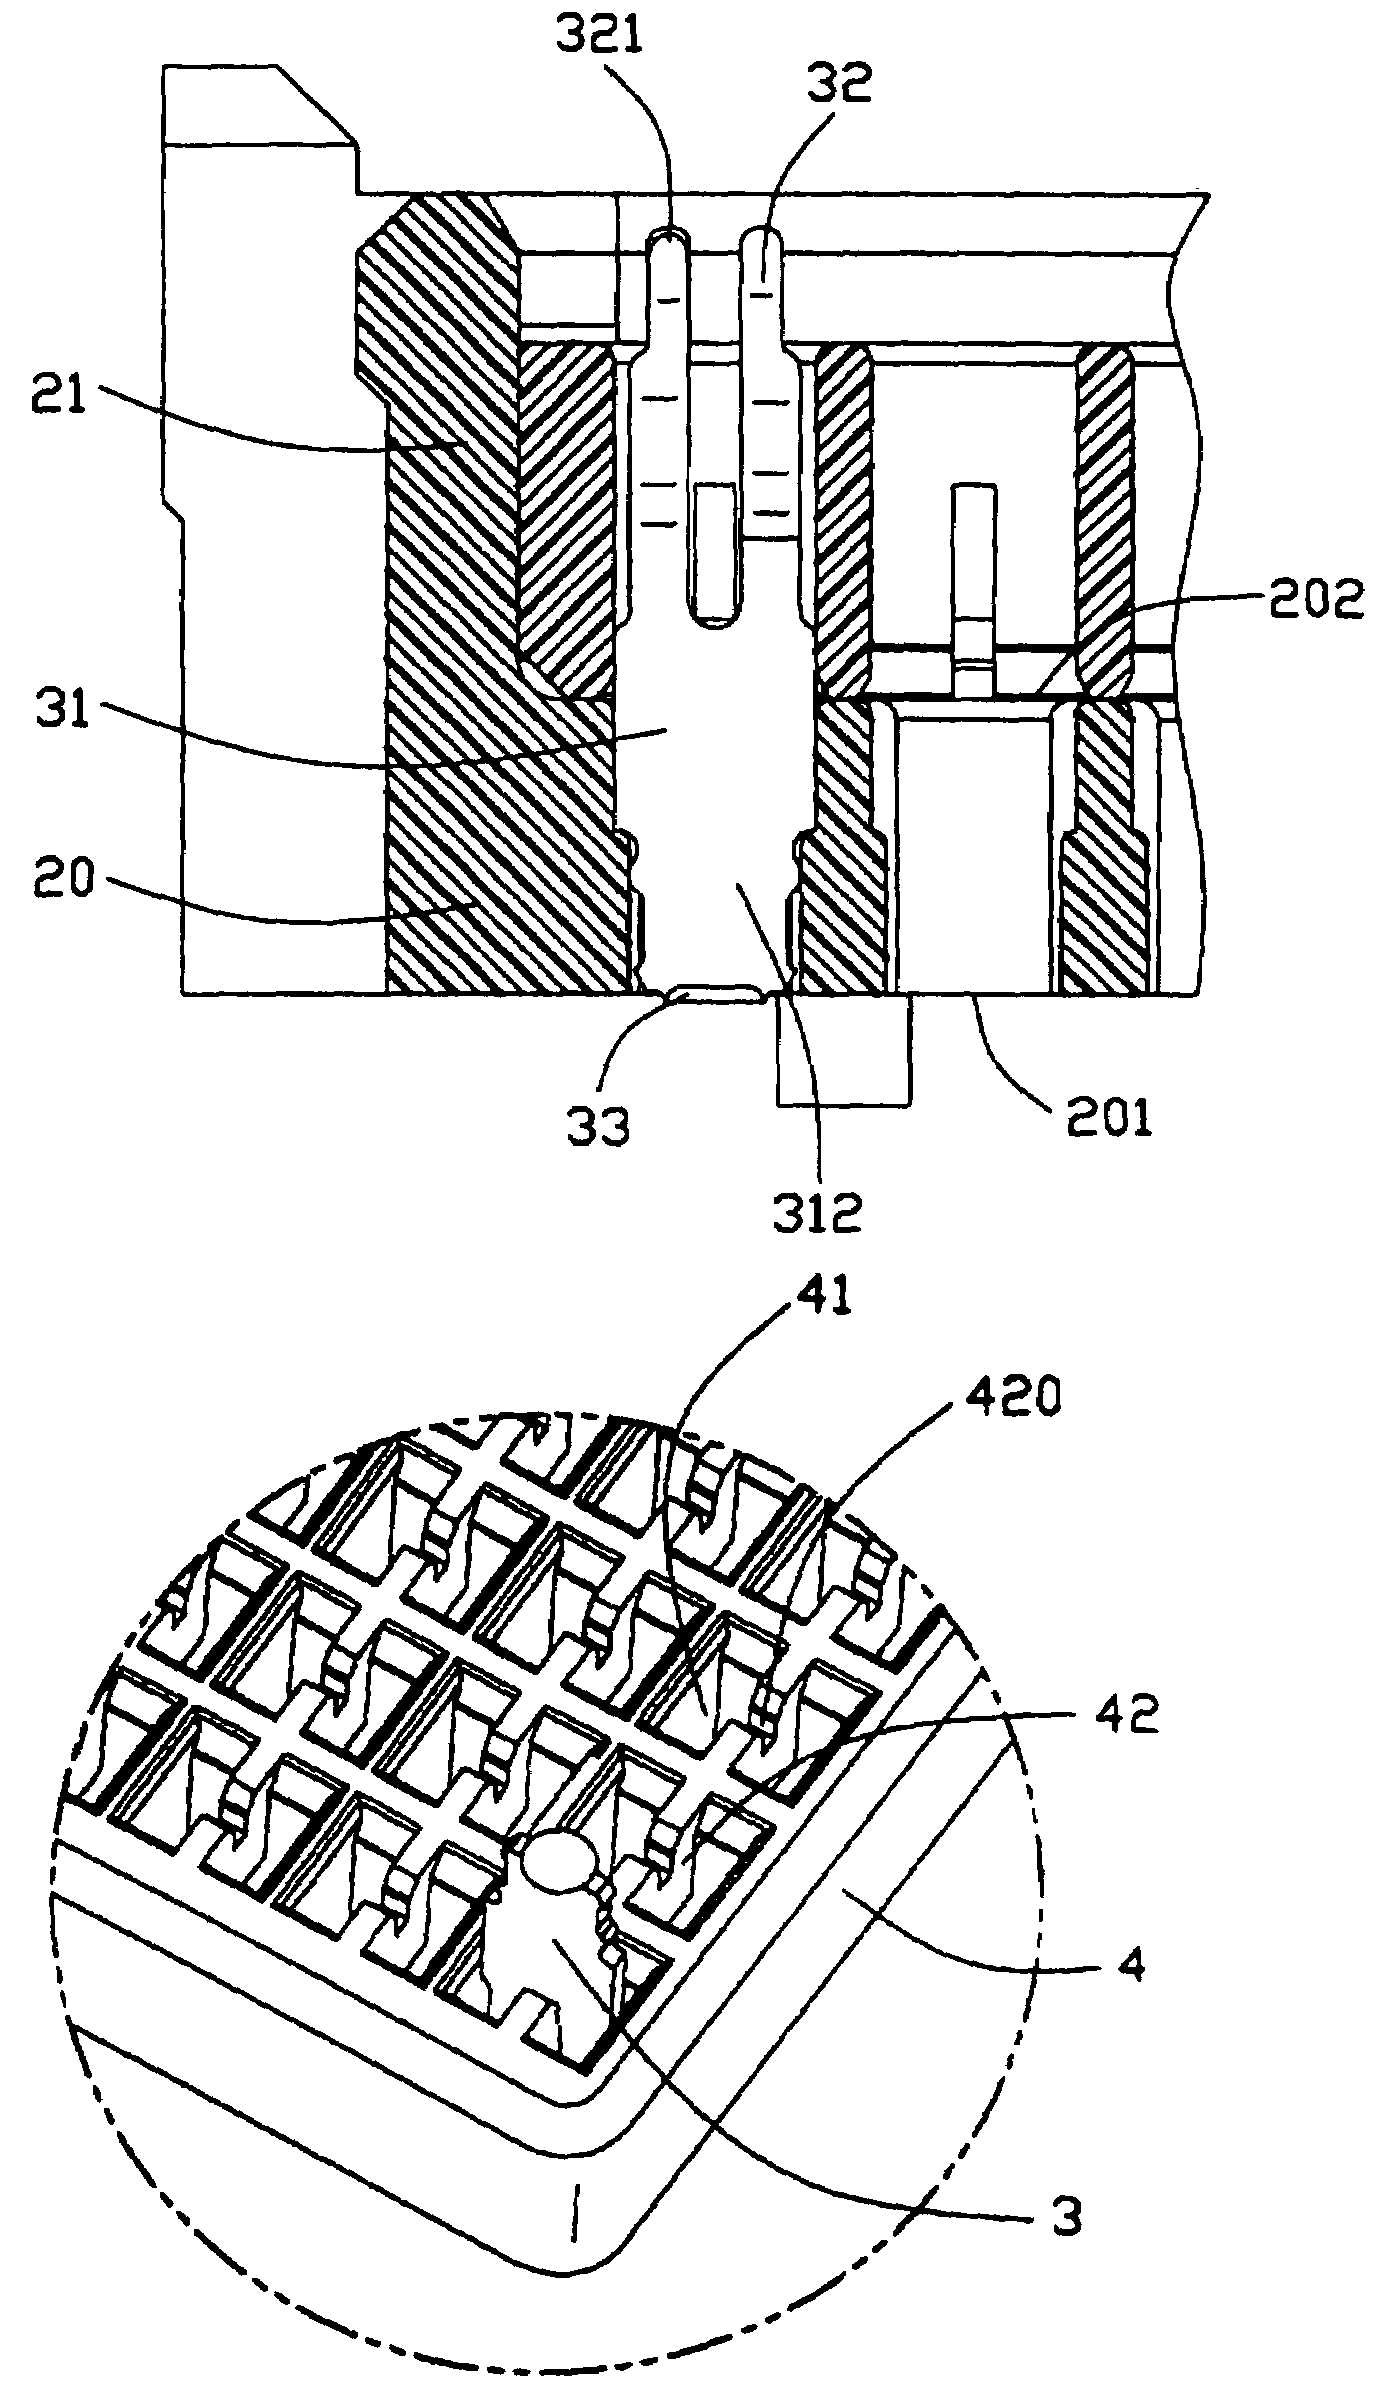 High density connector with enhanced structure